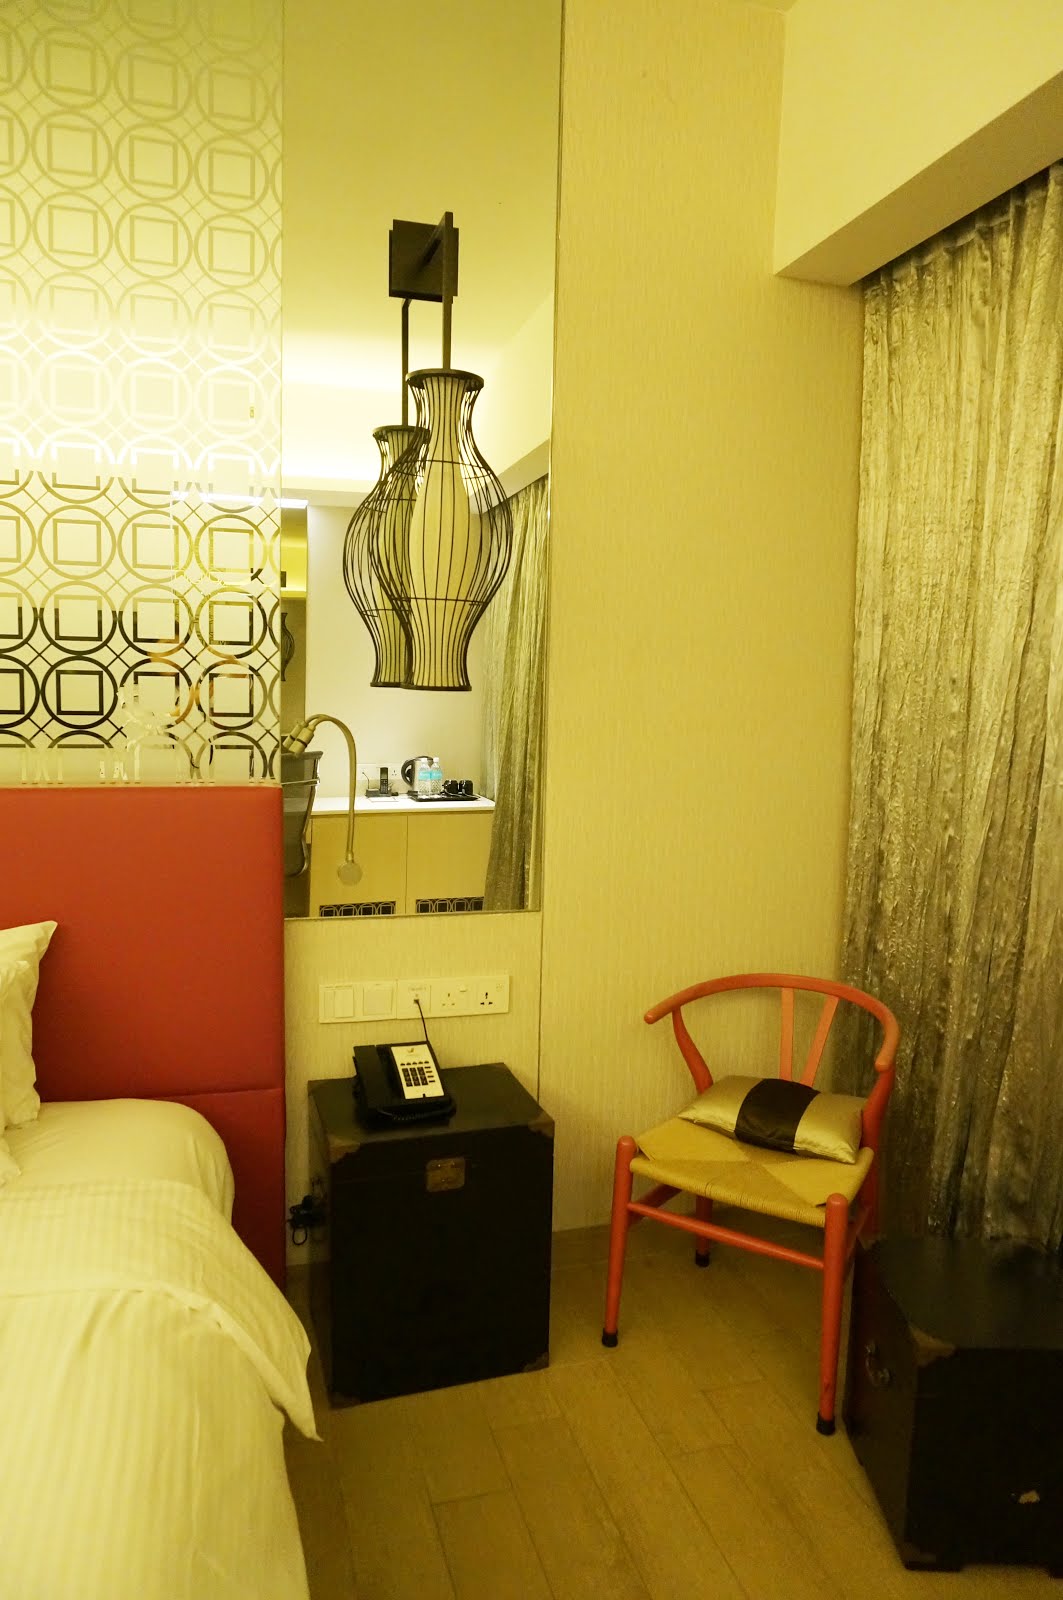 Village Hotel Katong Singapore Staycation Review photo